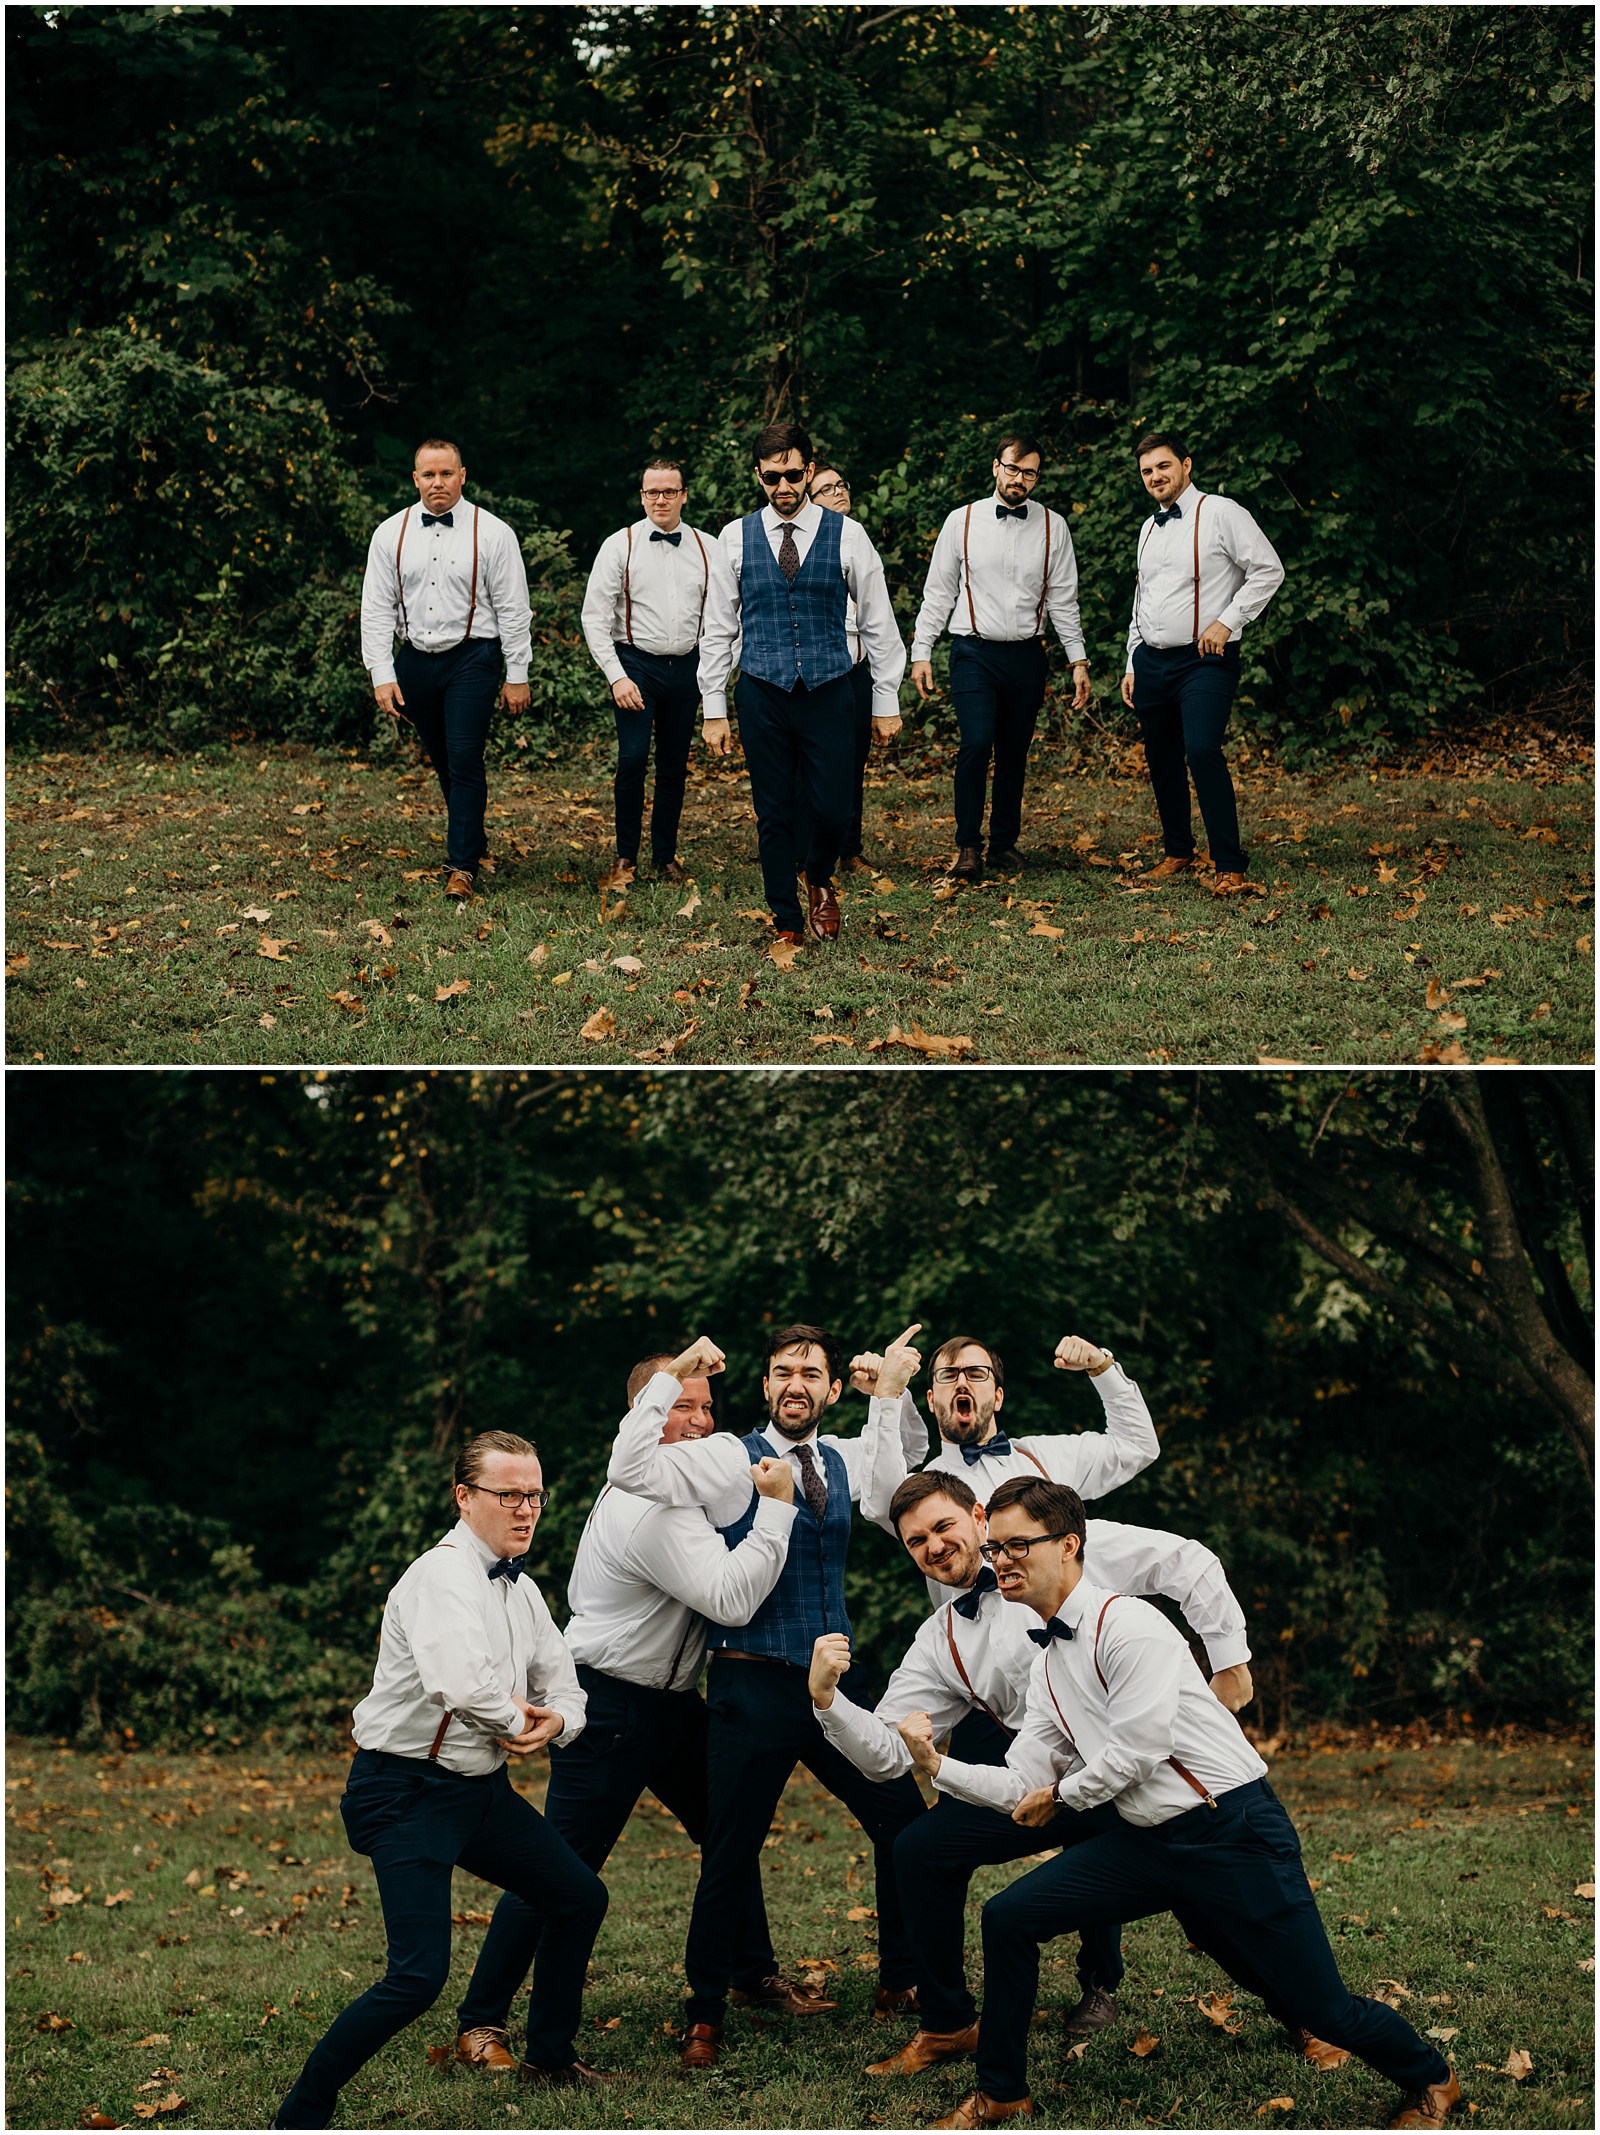 kindred bard, kindred north, Arkansas wedding photographer, scotland wedding photographer, Italy wedding photographer, Arkansas wedding photographer, mismatched bridesmaids dresses, barn wedding, first look, sparkler exit, the Johnsons photo, the Johnsons, Maine wedding photographer 